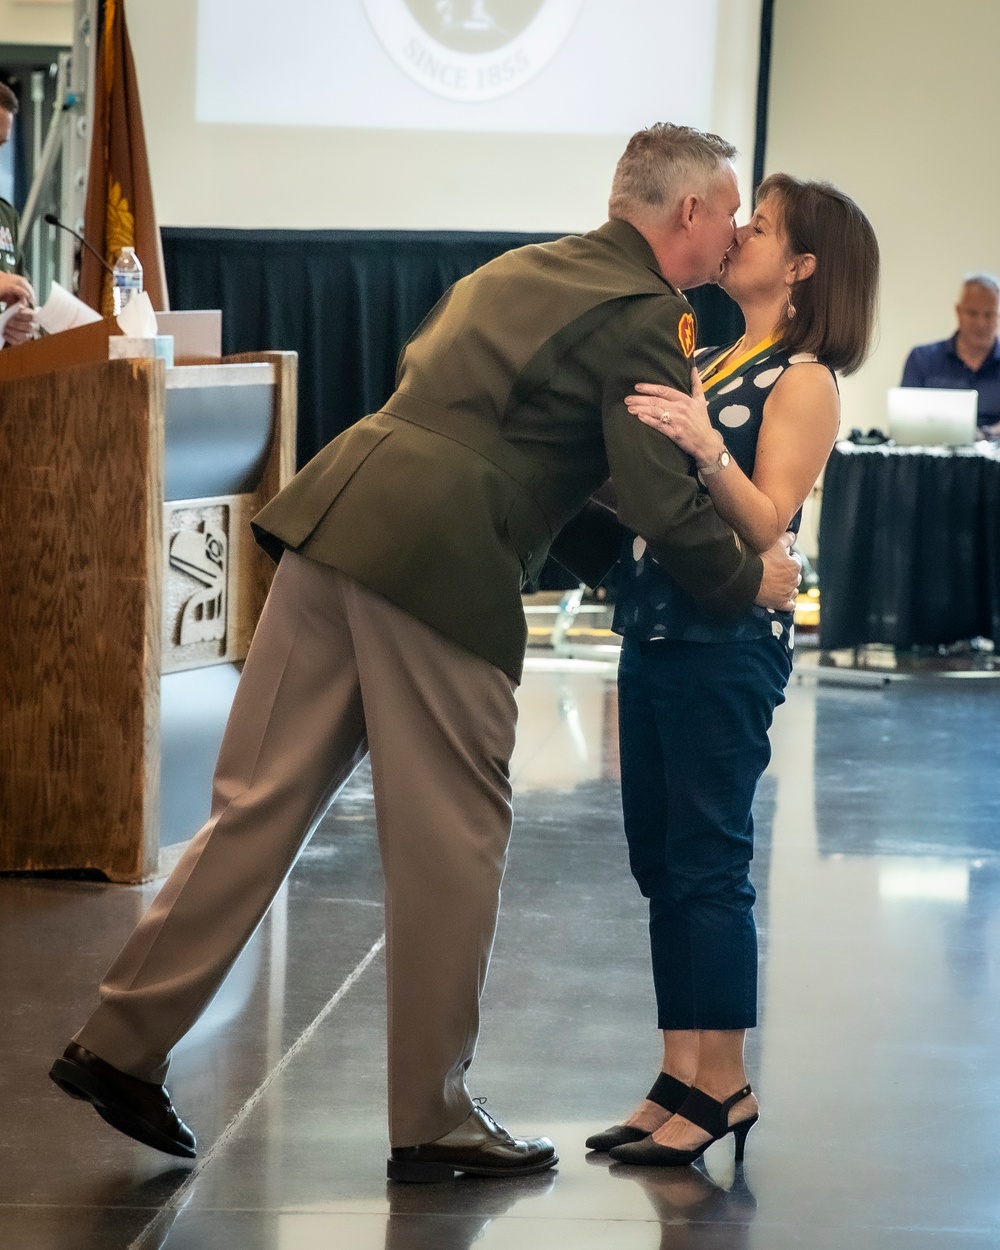 Washington National Guard Command Chief Warrant Officer retires after forty years of service